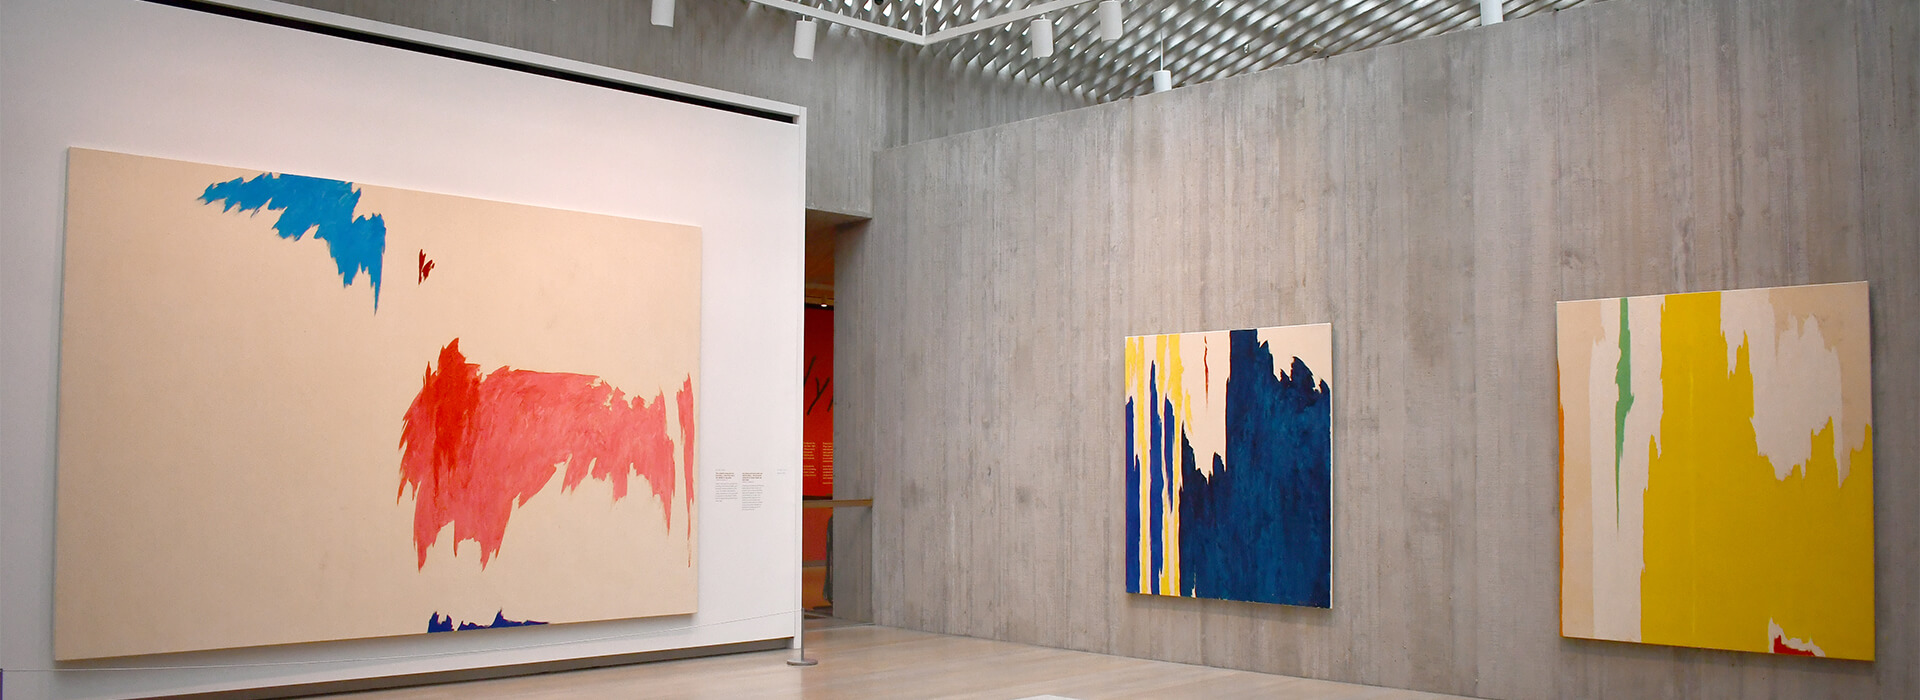 An art gallery with concrete walls and large colorful abstract artworks